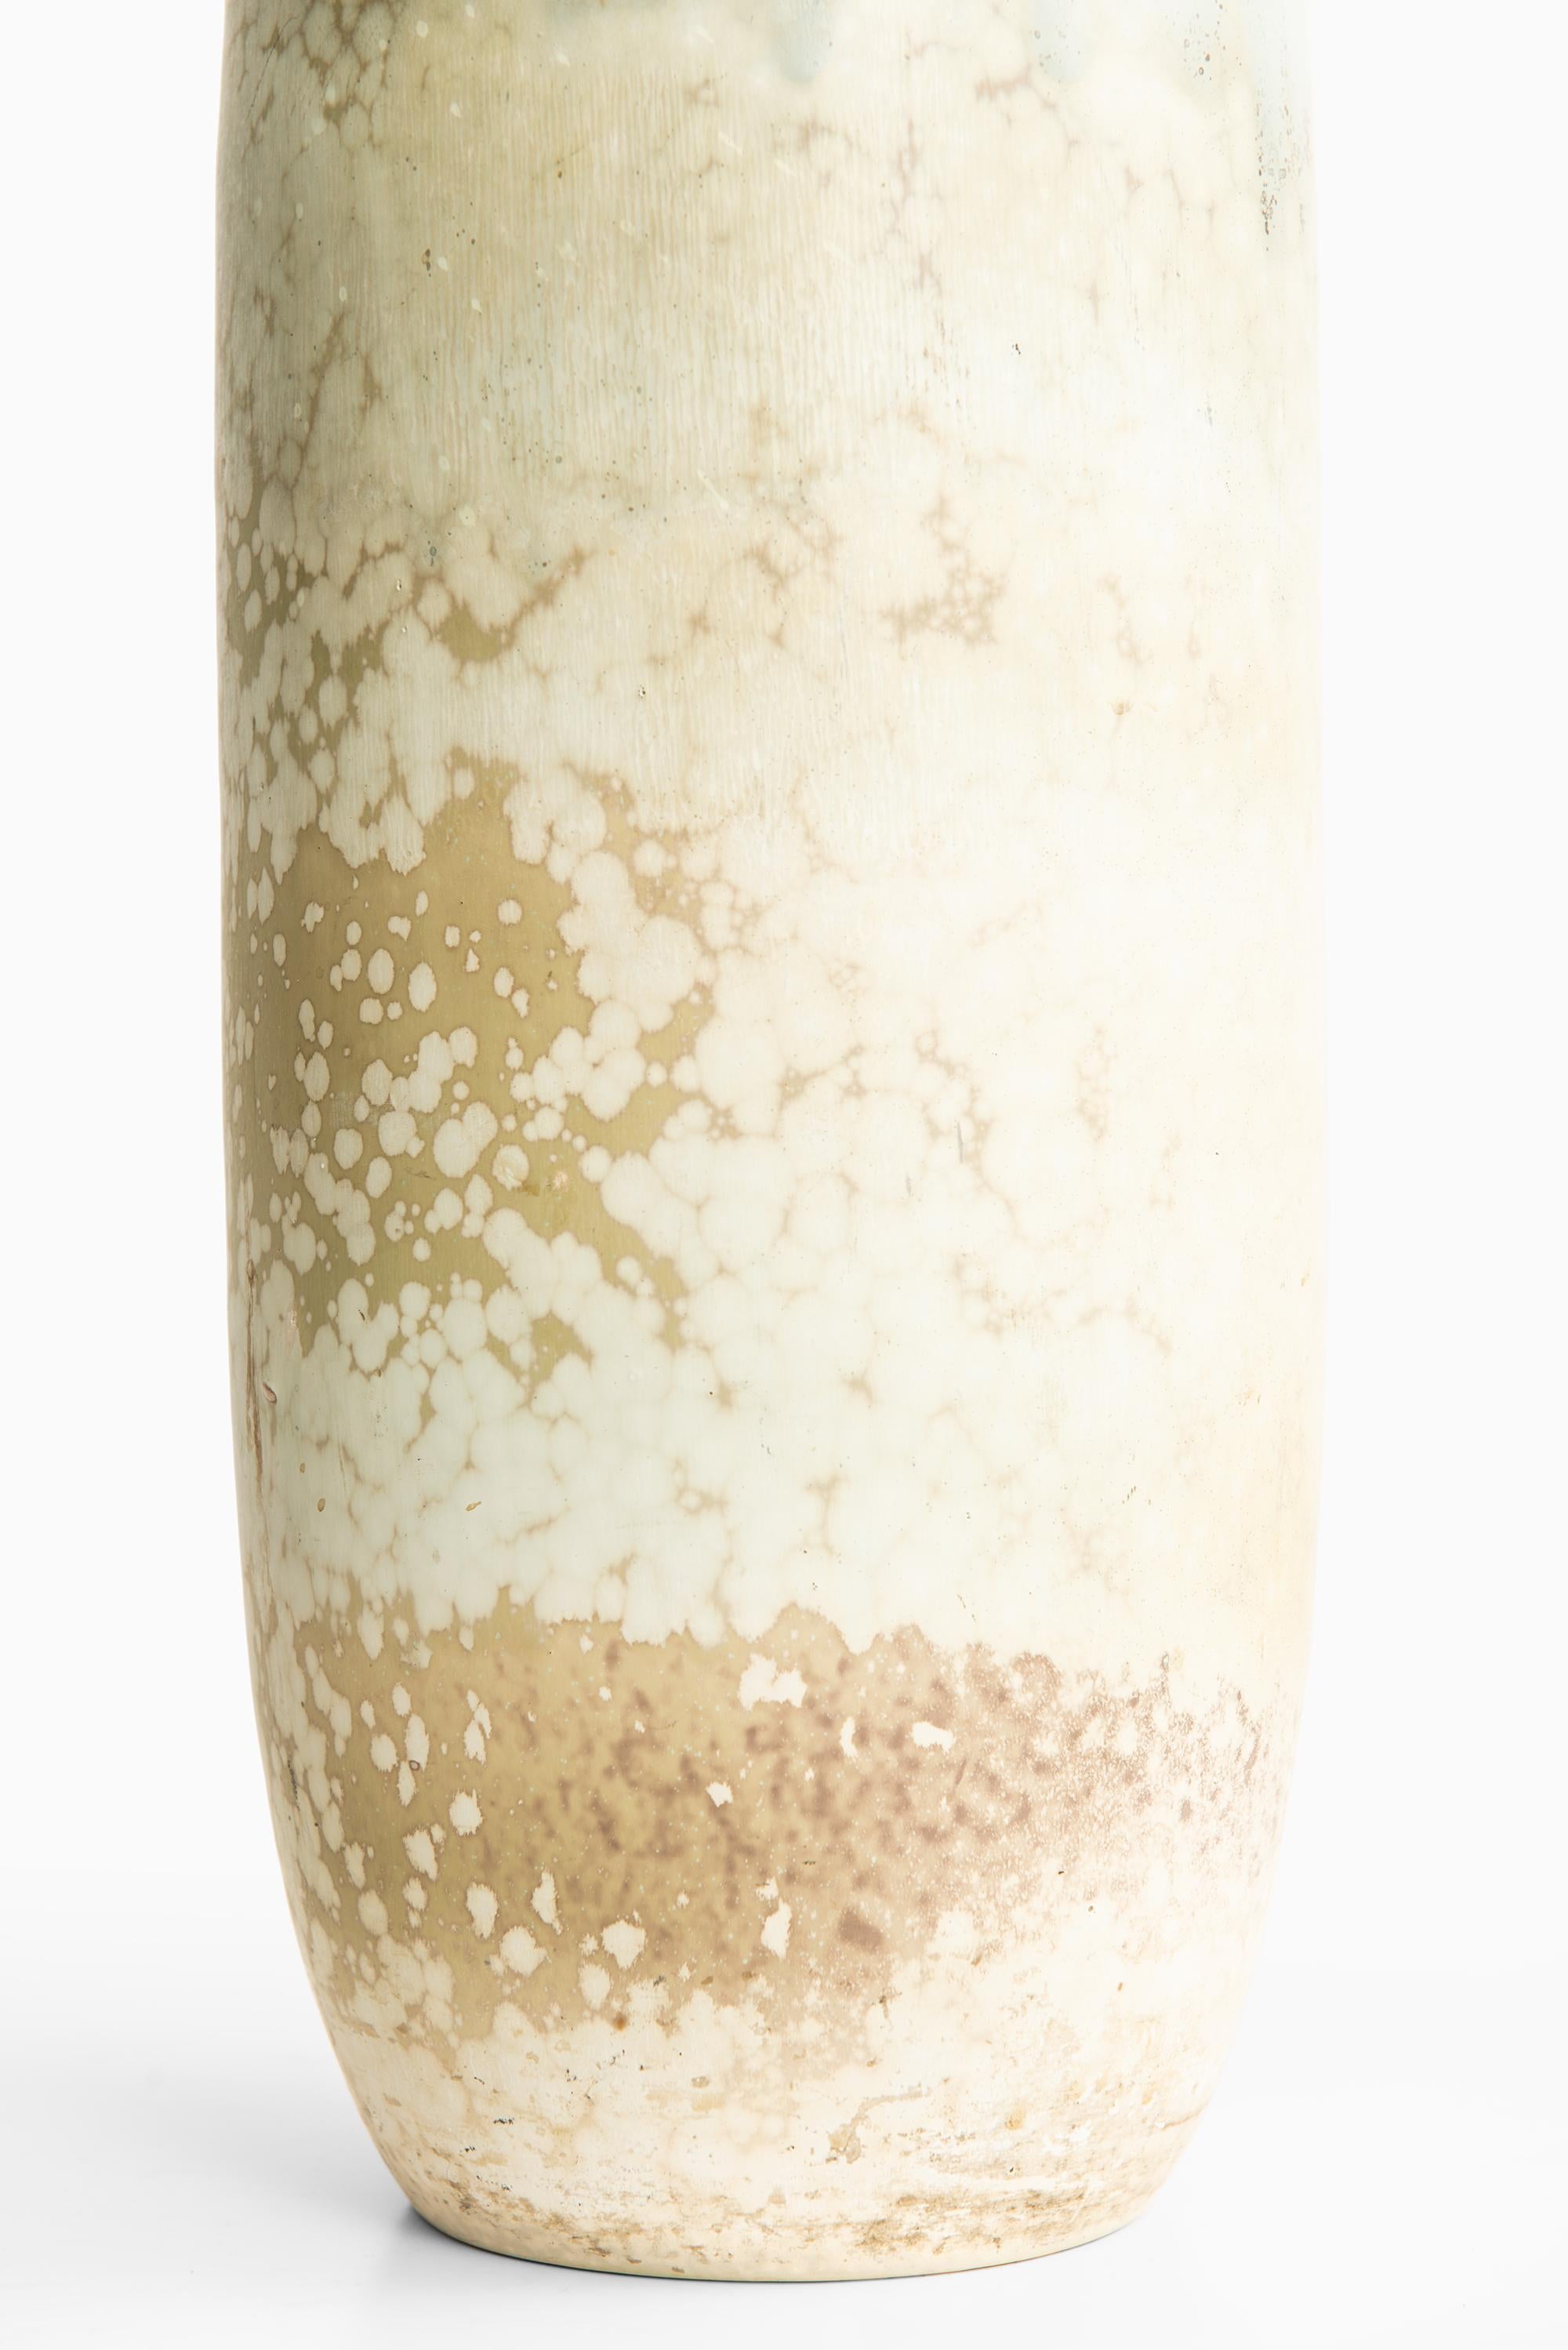 Very rare and tall ceramic floor vase designed by Carl-Harry Stålhane. Produced by Rörstrand in Sweden.